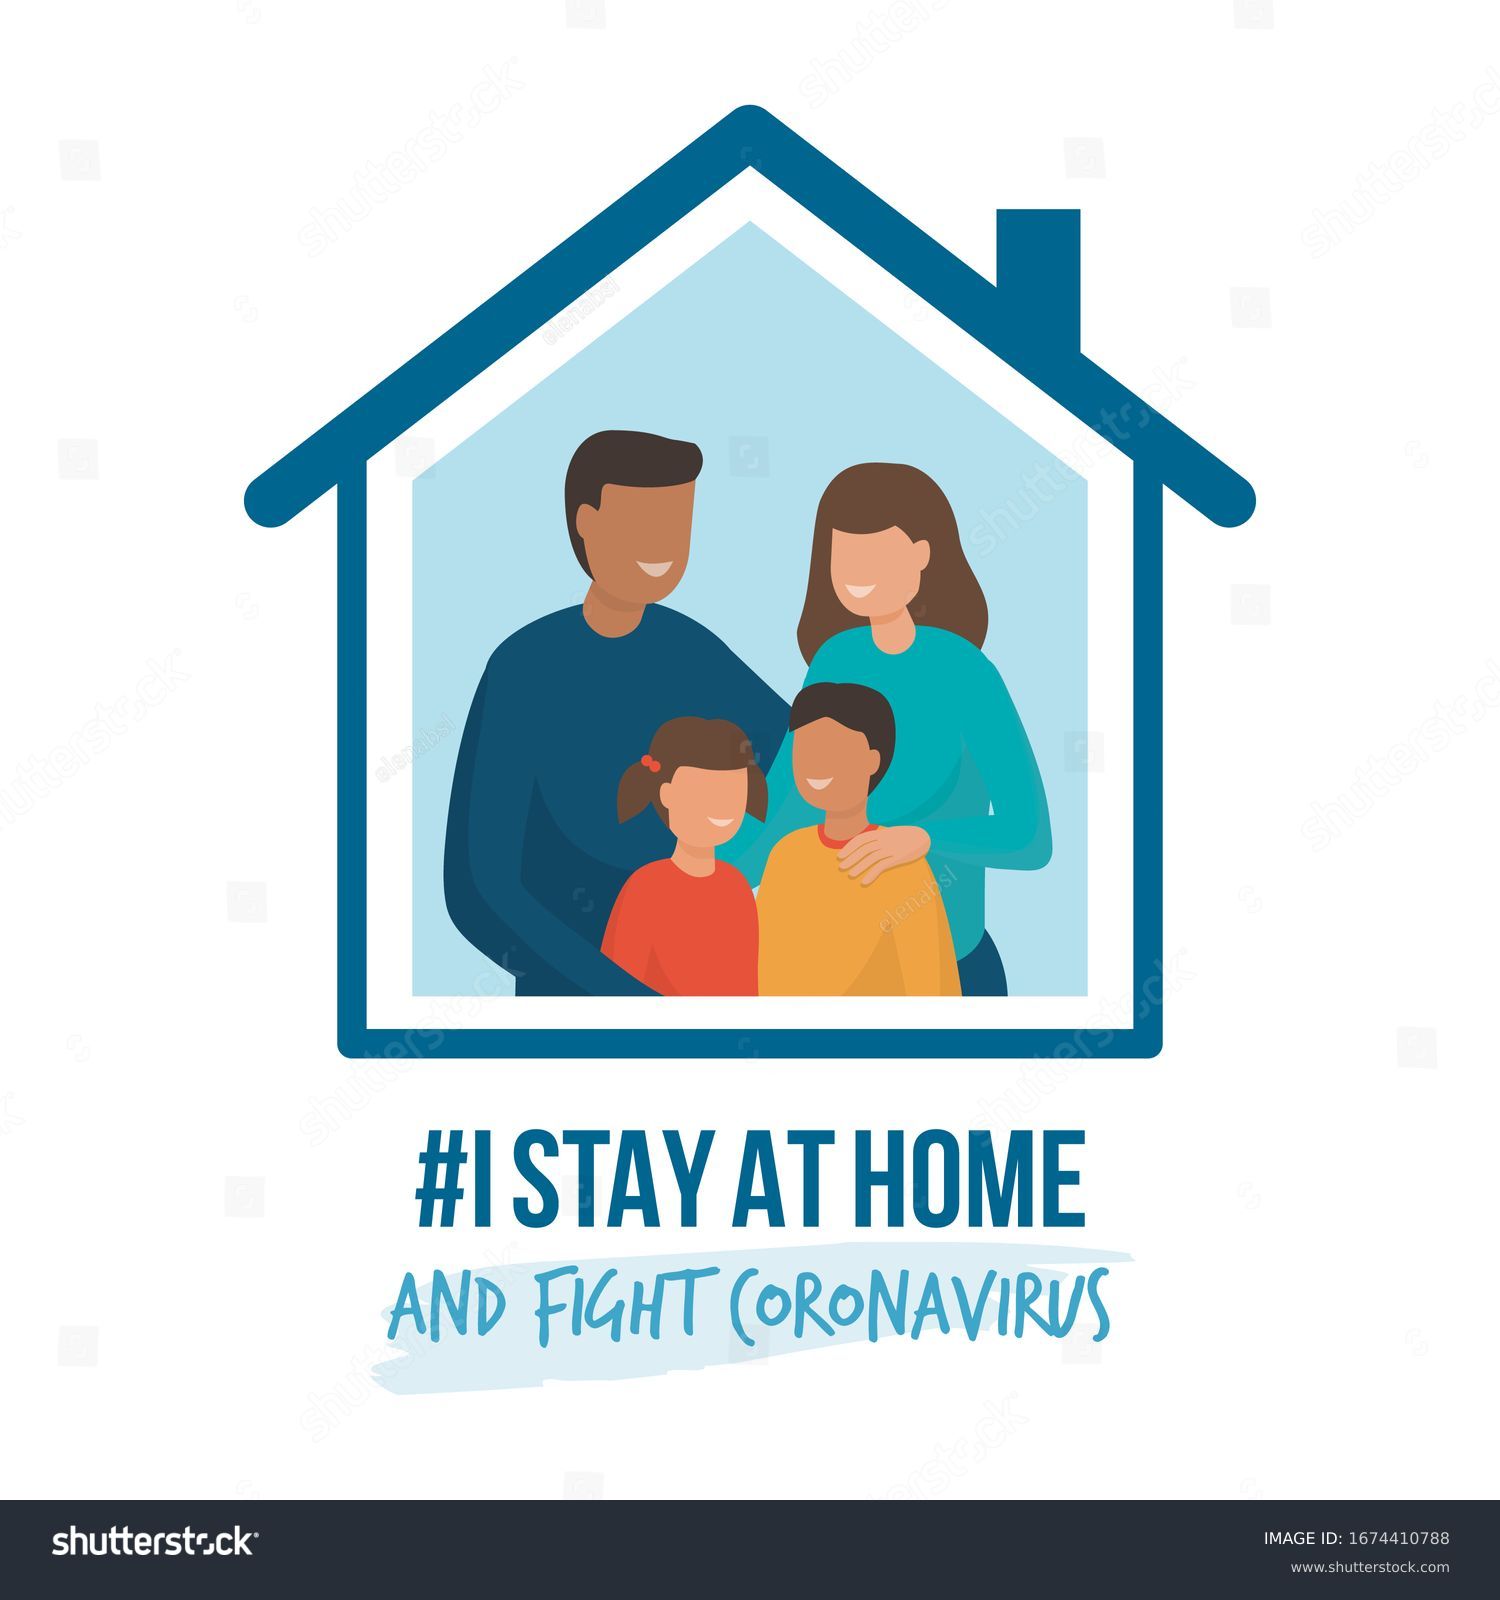 I stay at home awareness social media campaign and coronavirus prevention: family smiling and staying together #1674410788